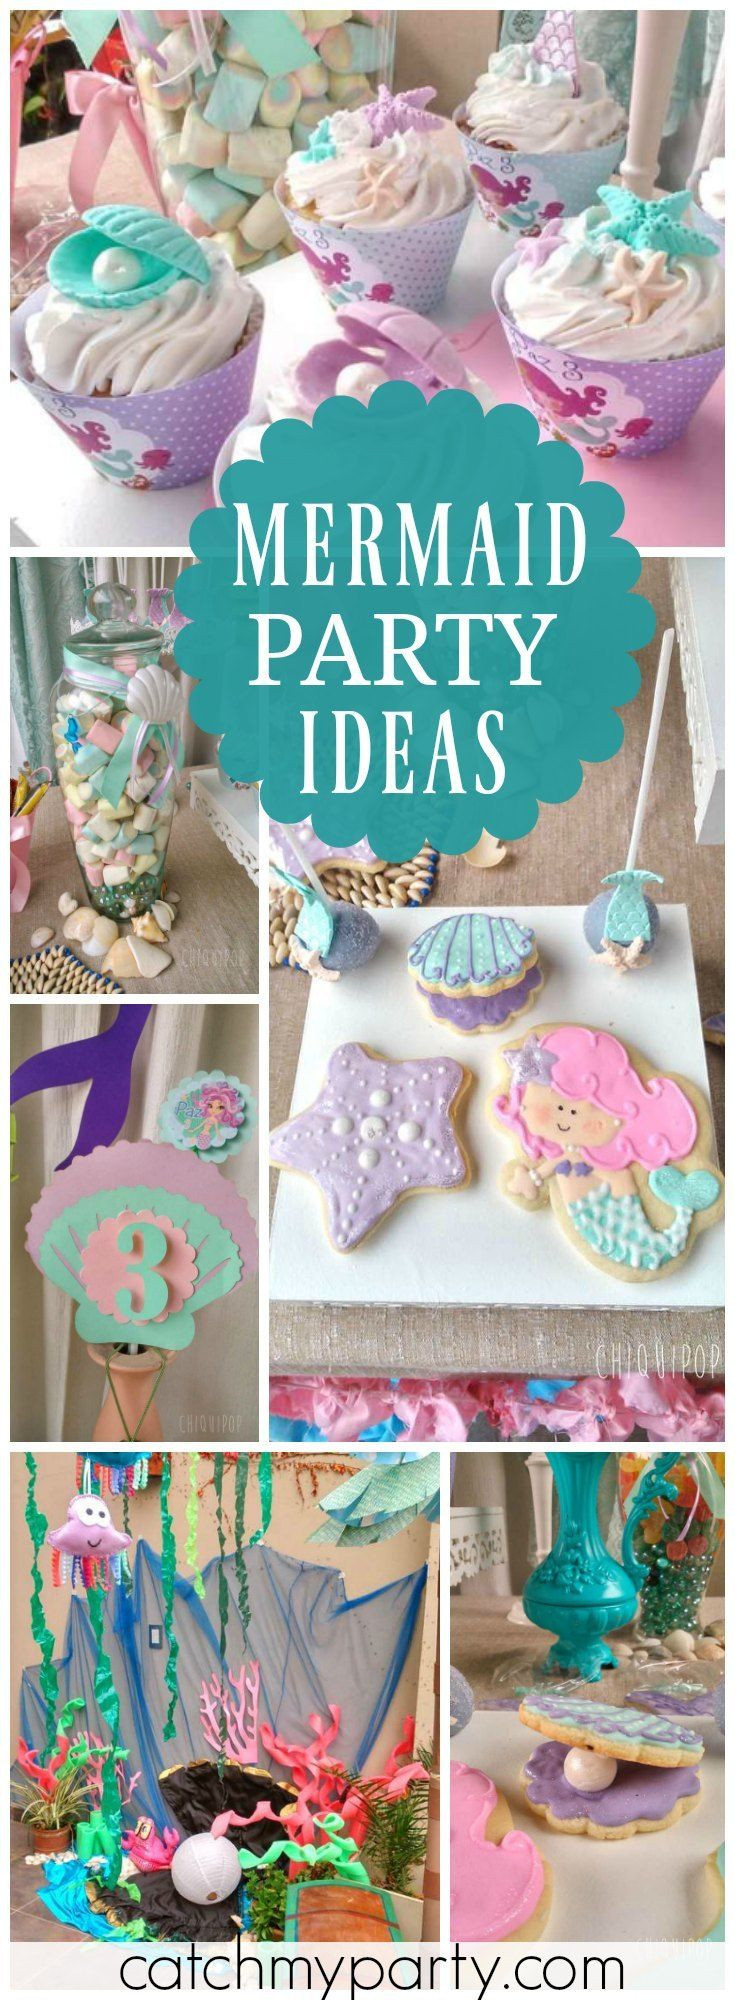 Mermaid Party Ideas Pinterest
 1000 images about Mermaid Party Ideas on Pinterest